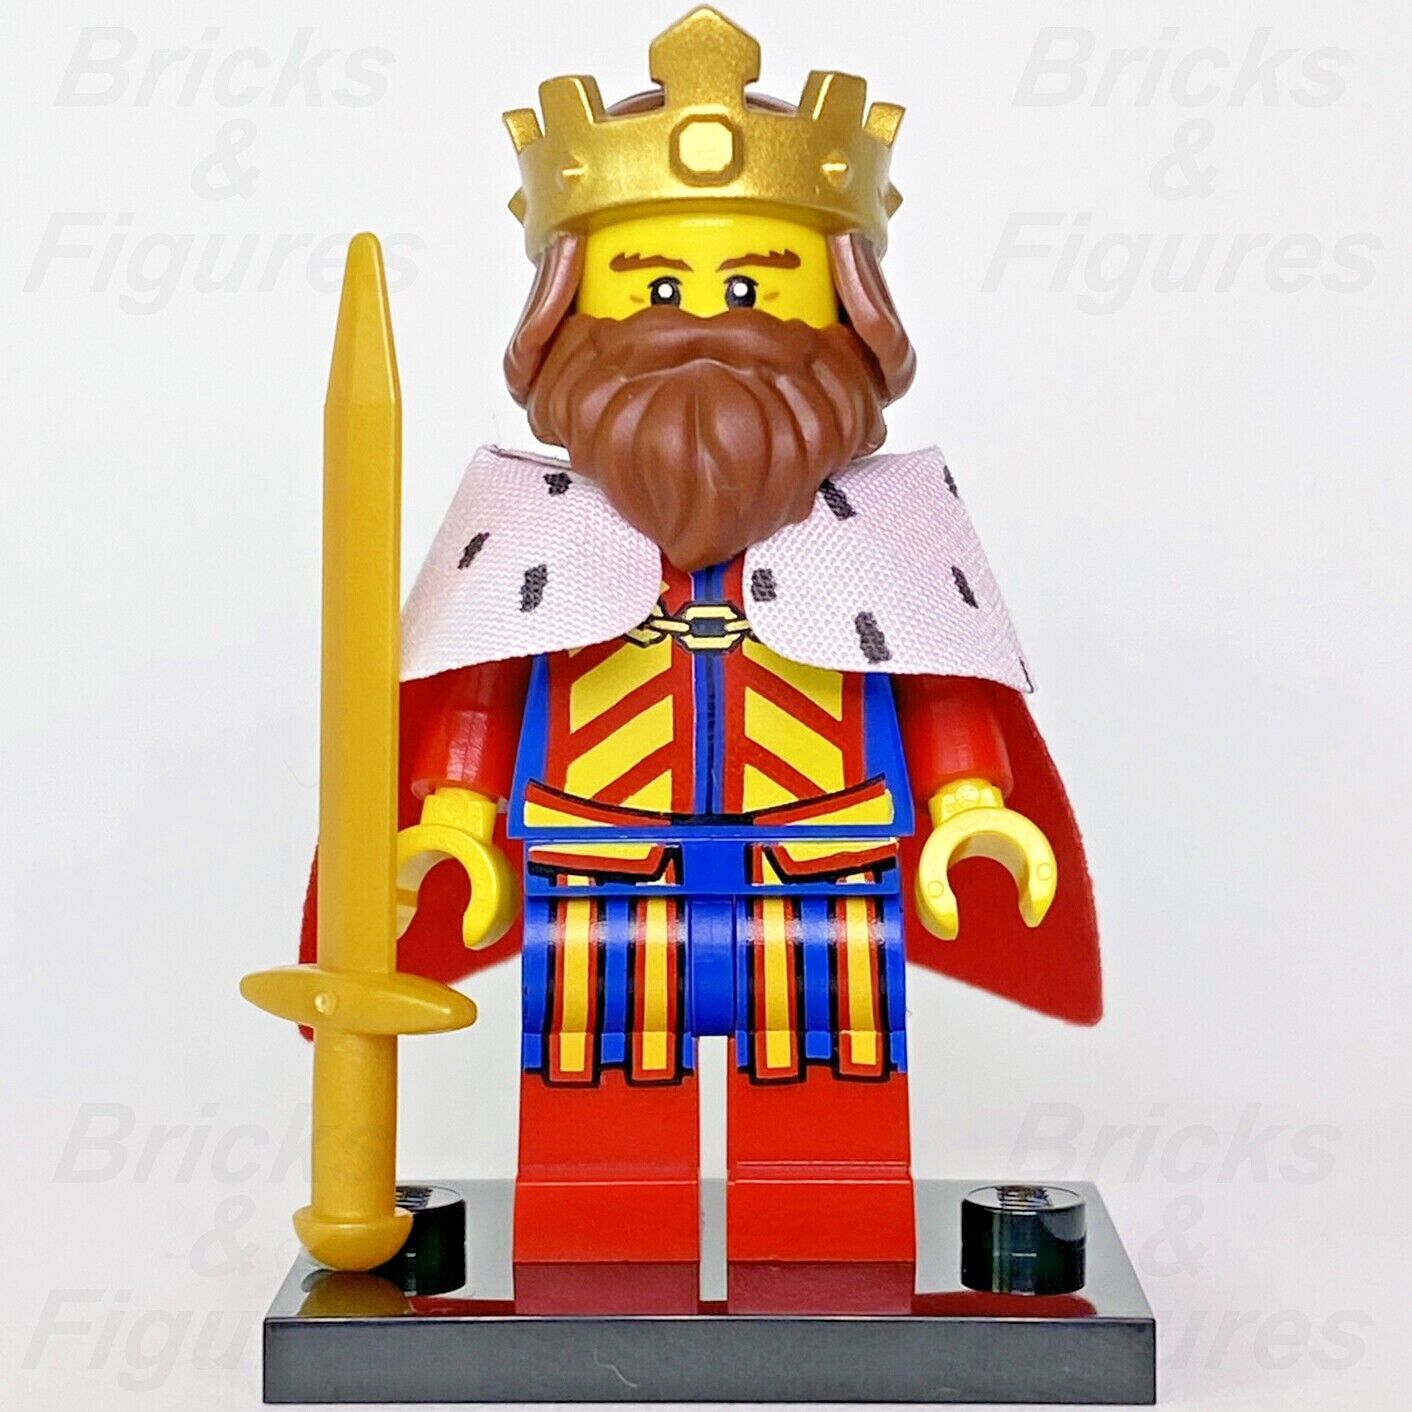 New Collectible Minifigures LEGO Classic King Series 13 Minifig 71008 col13-1 - Bricks & Figures